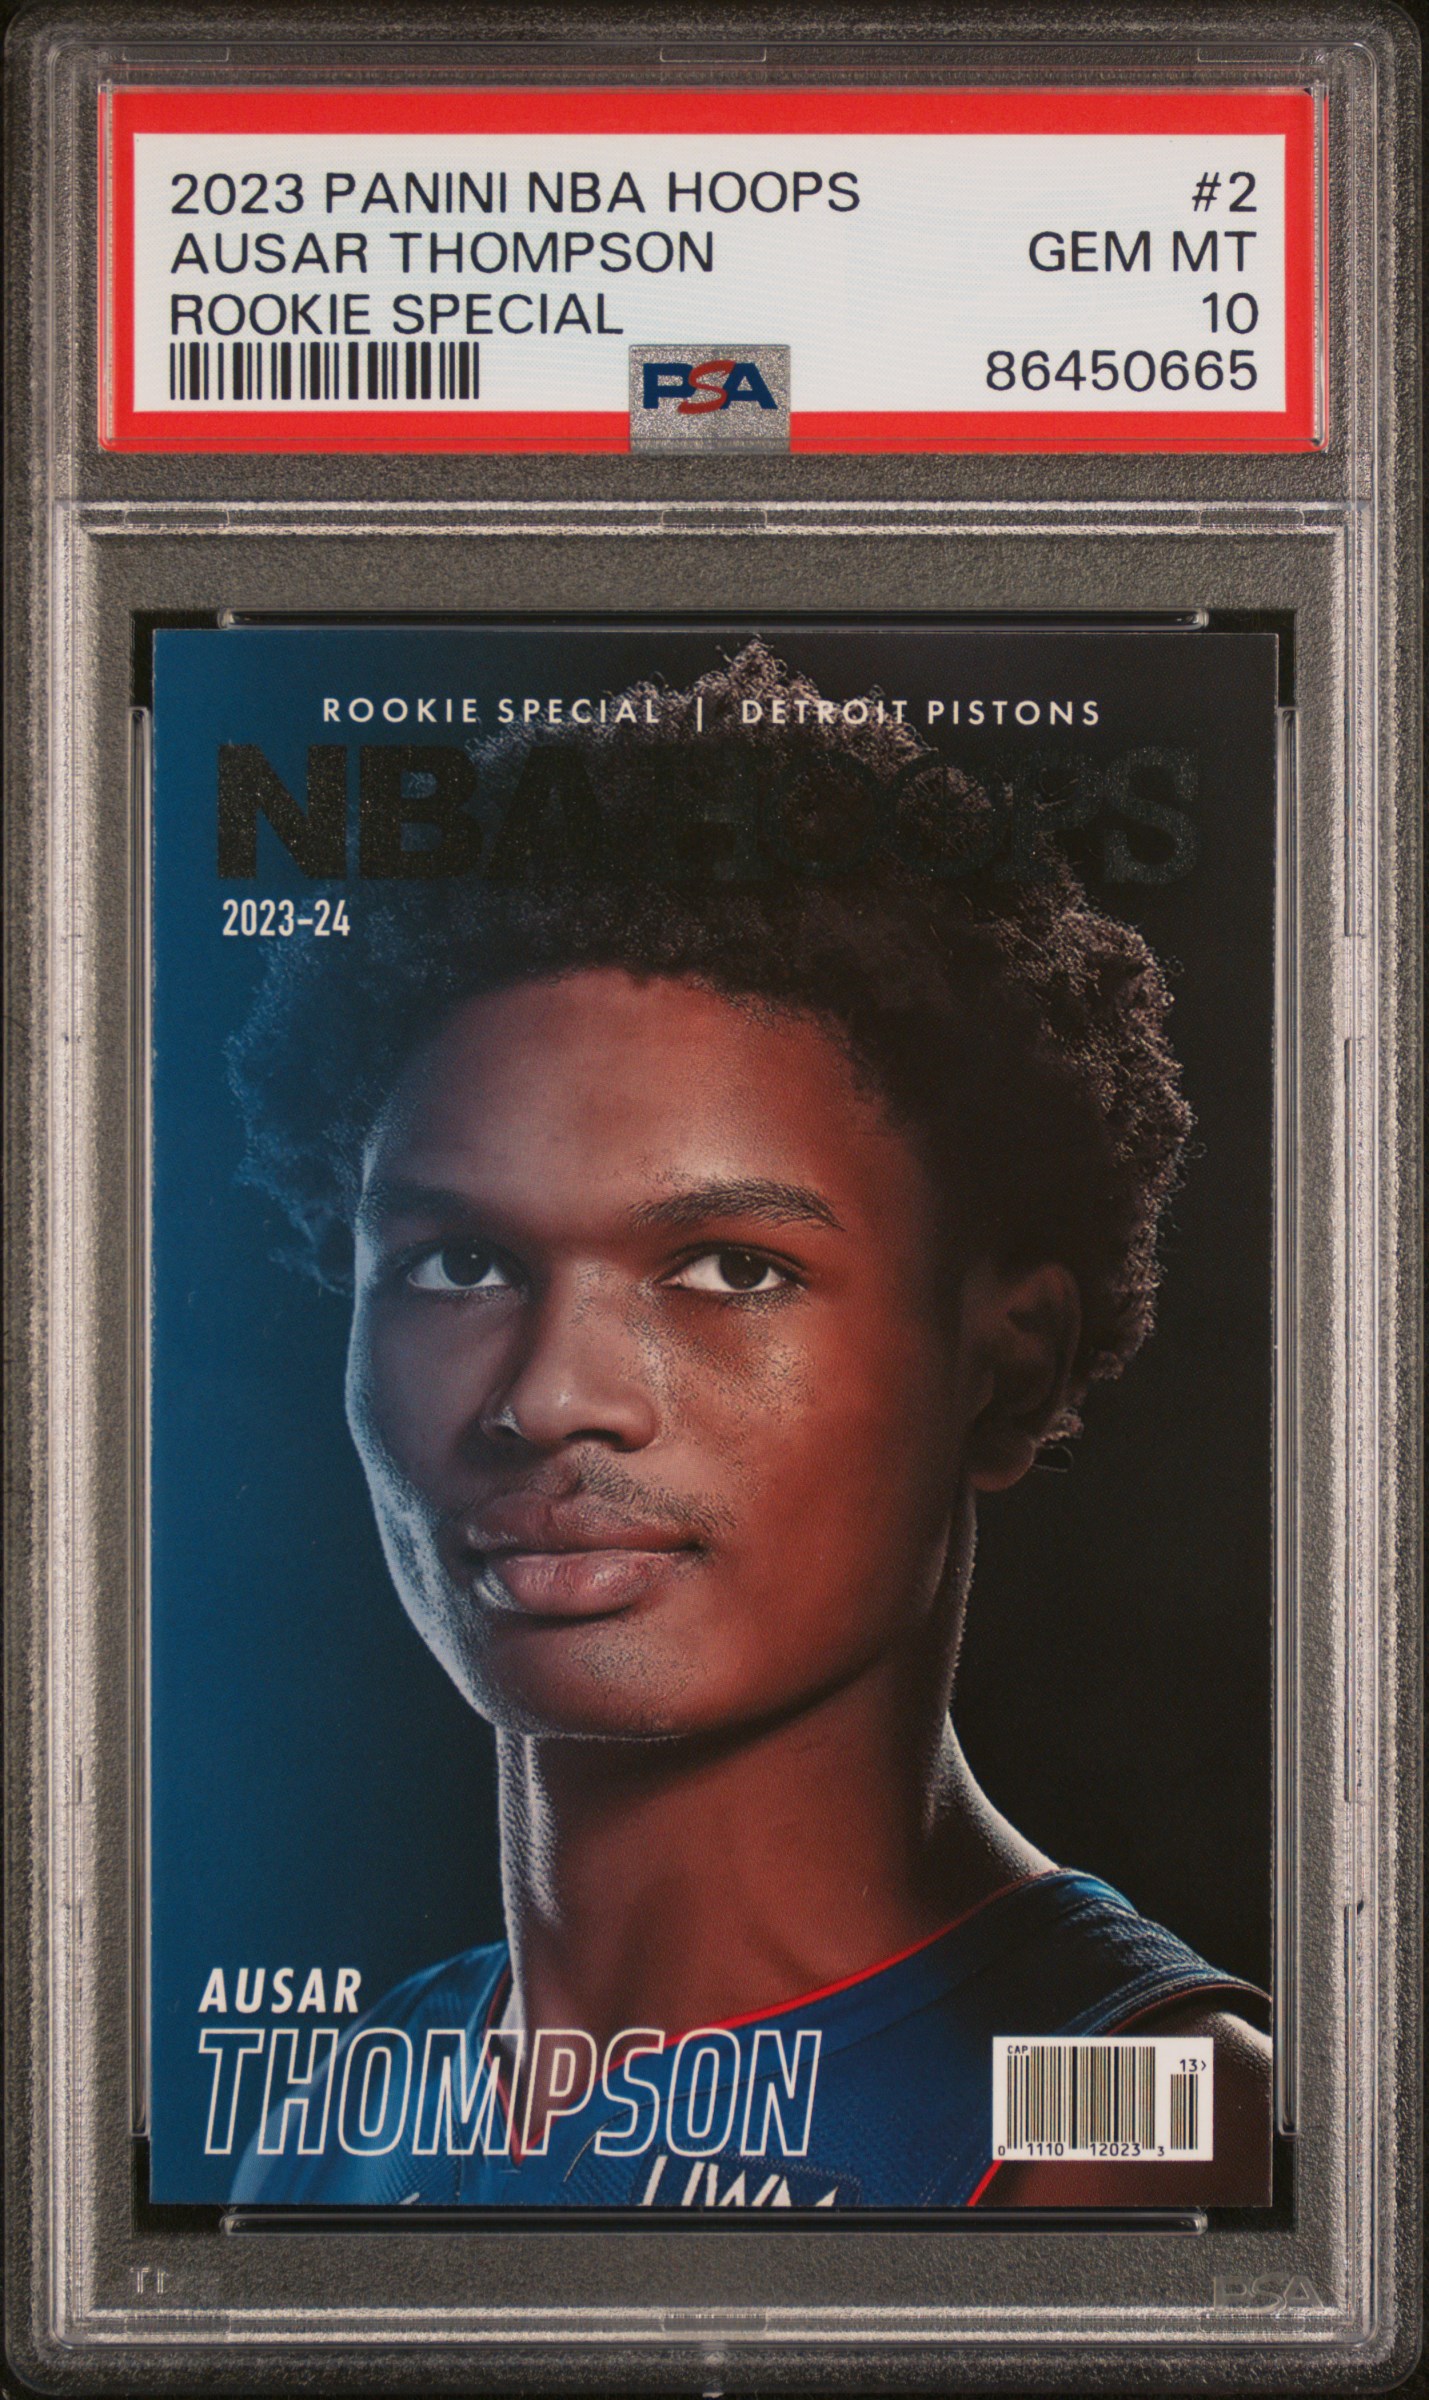 2023-24 Panini NBA Hoops Rookie Special #2 Ausar Thompson Rookie Card – PSA GEM MT 10